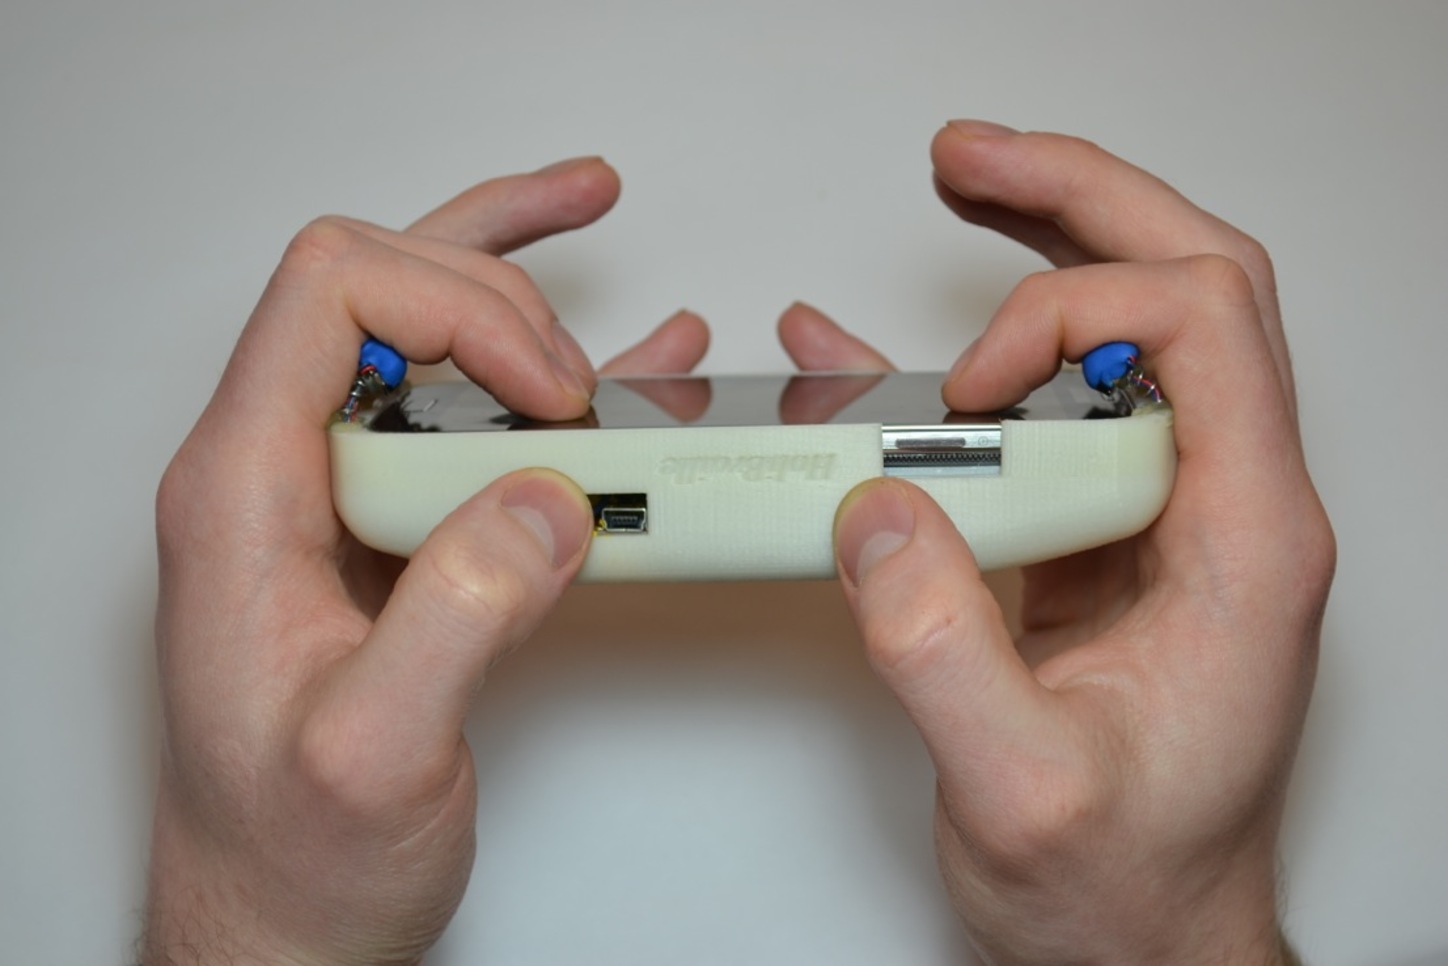 A case surrounding a mobile device and two hands holding the case with the device facing forward. Each hand has three fingers over a motor that provides haptic feedback.